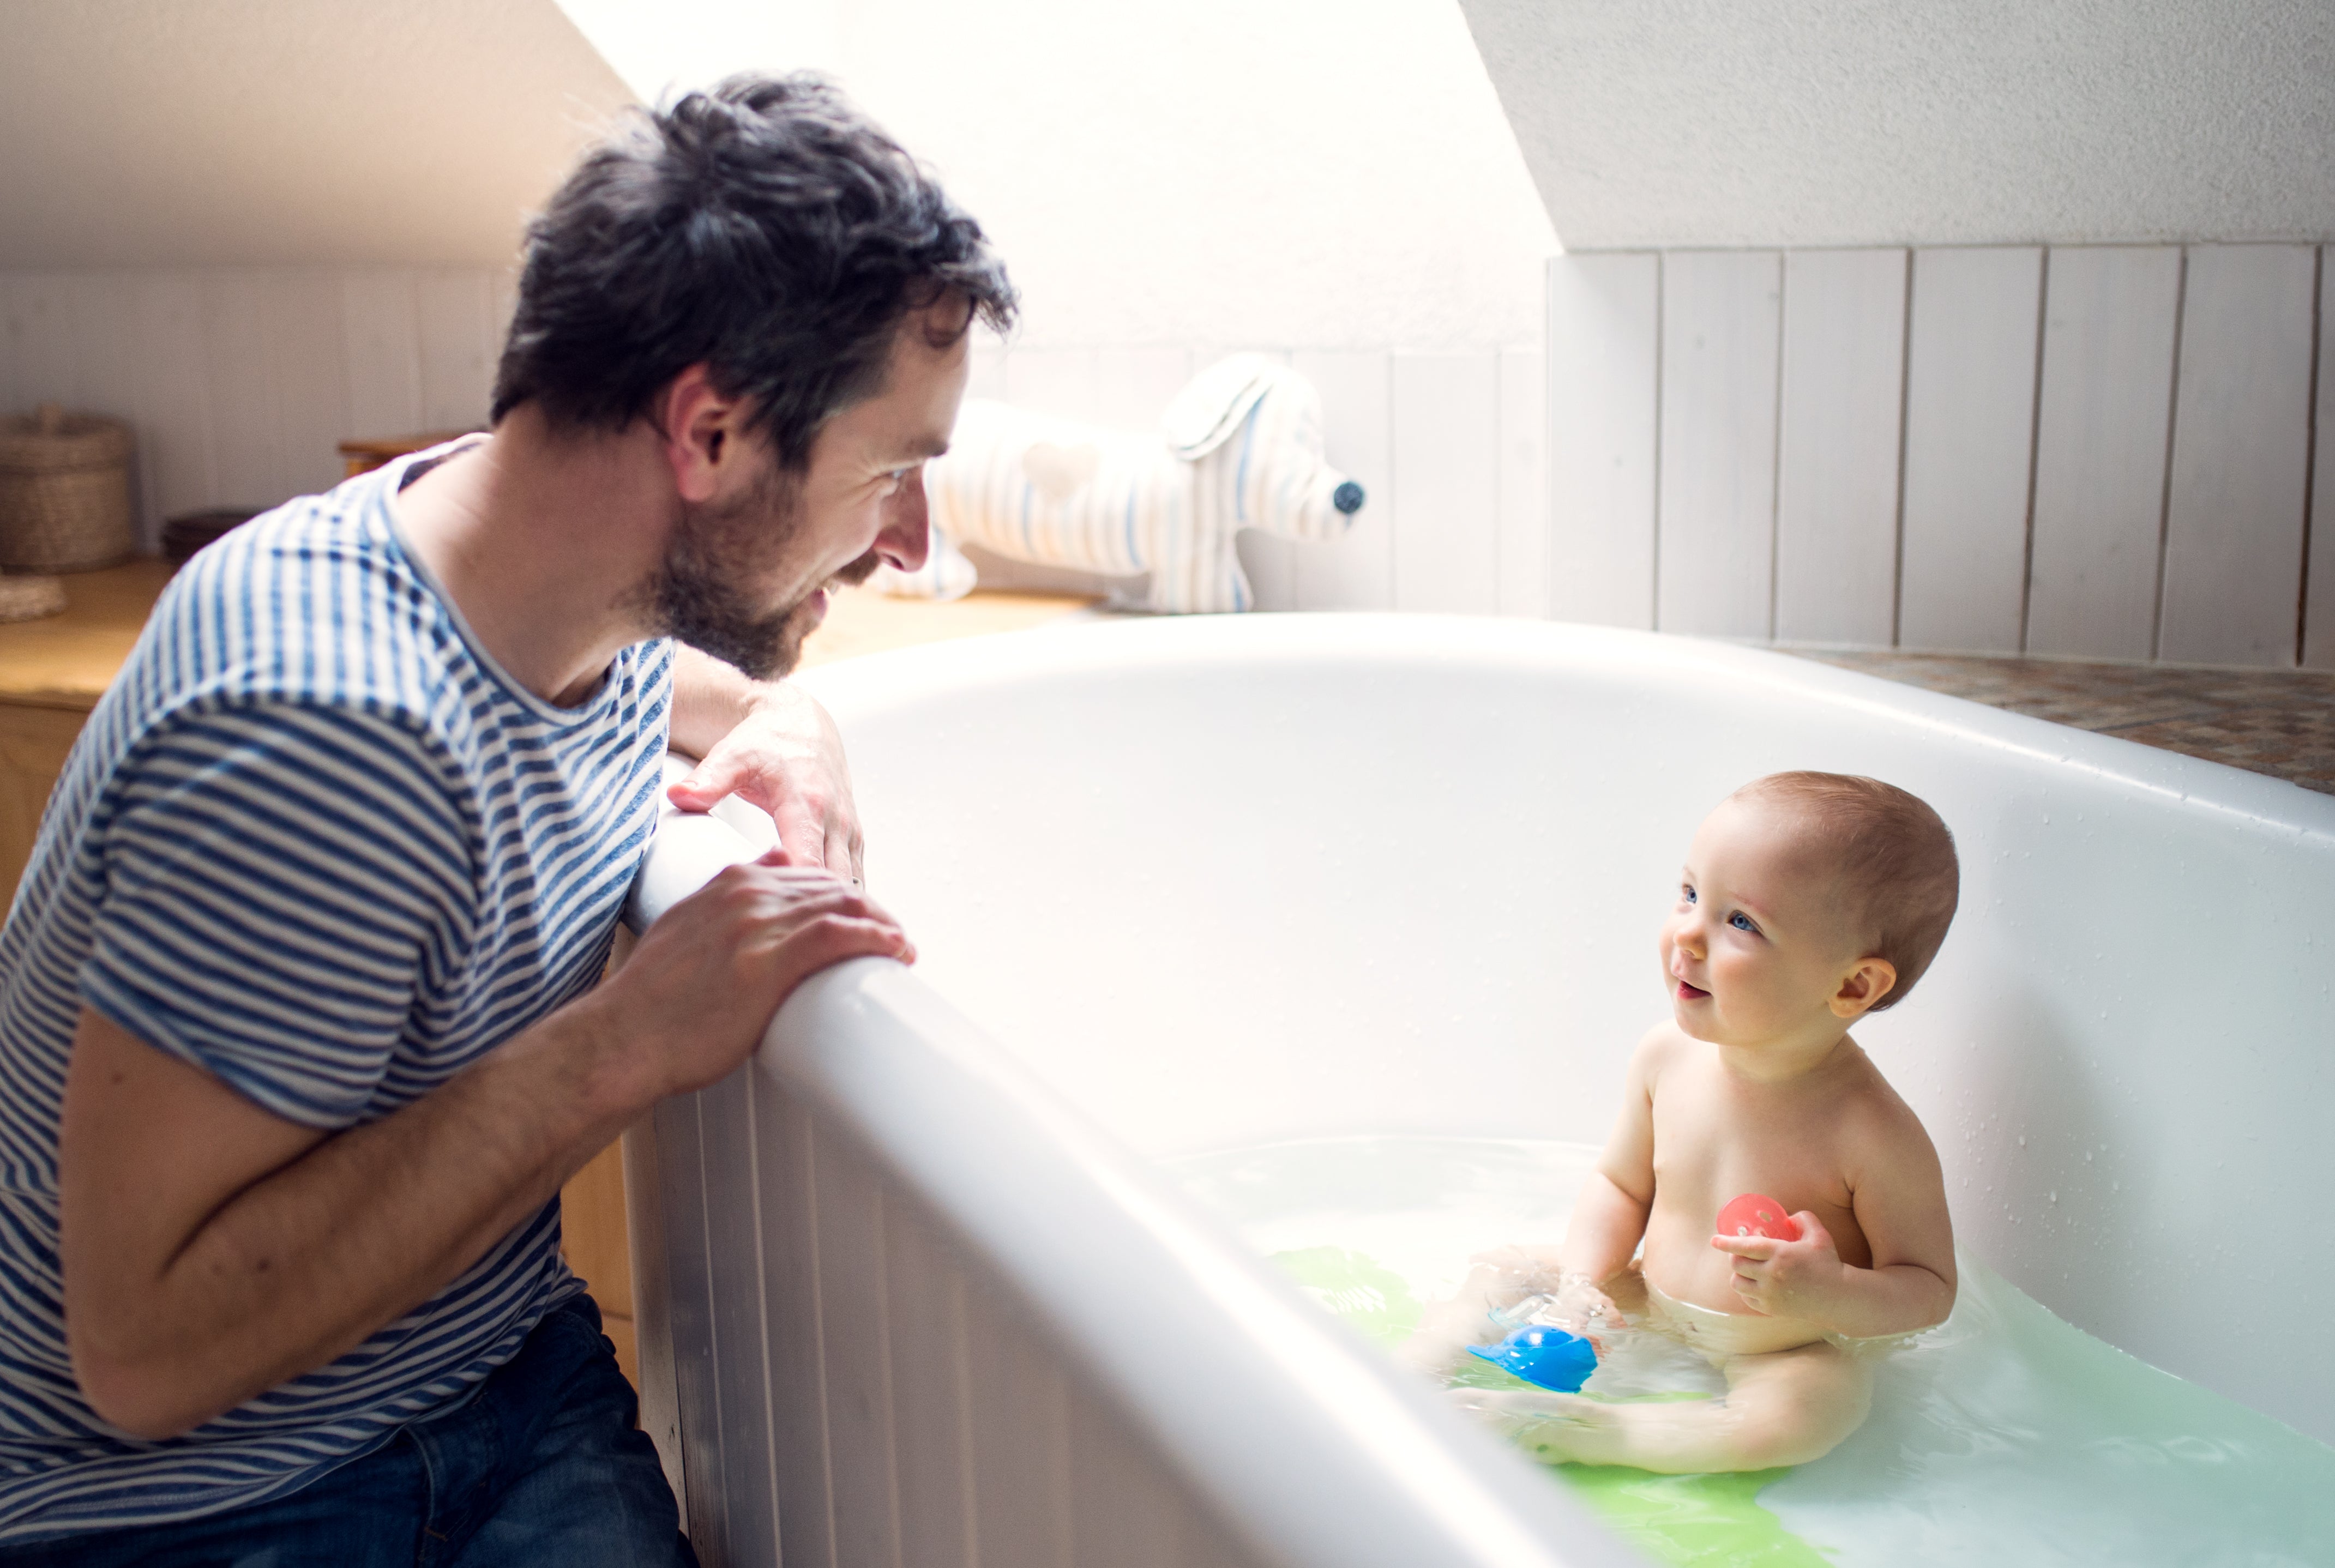 A father kneels next to a bath tub and talks to his bathing toddler about hygiene habits. Concept of fun bath time, educational bath time.